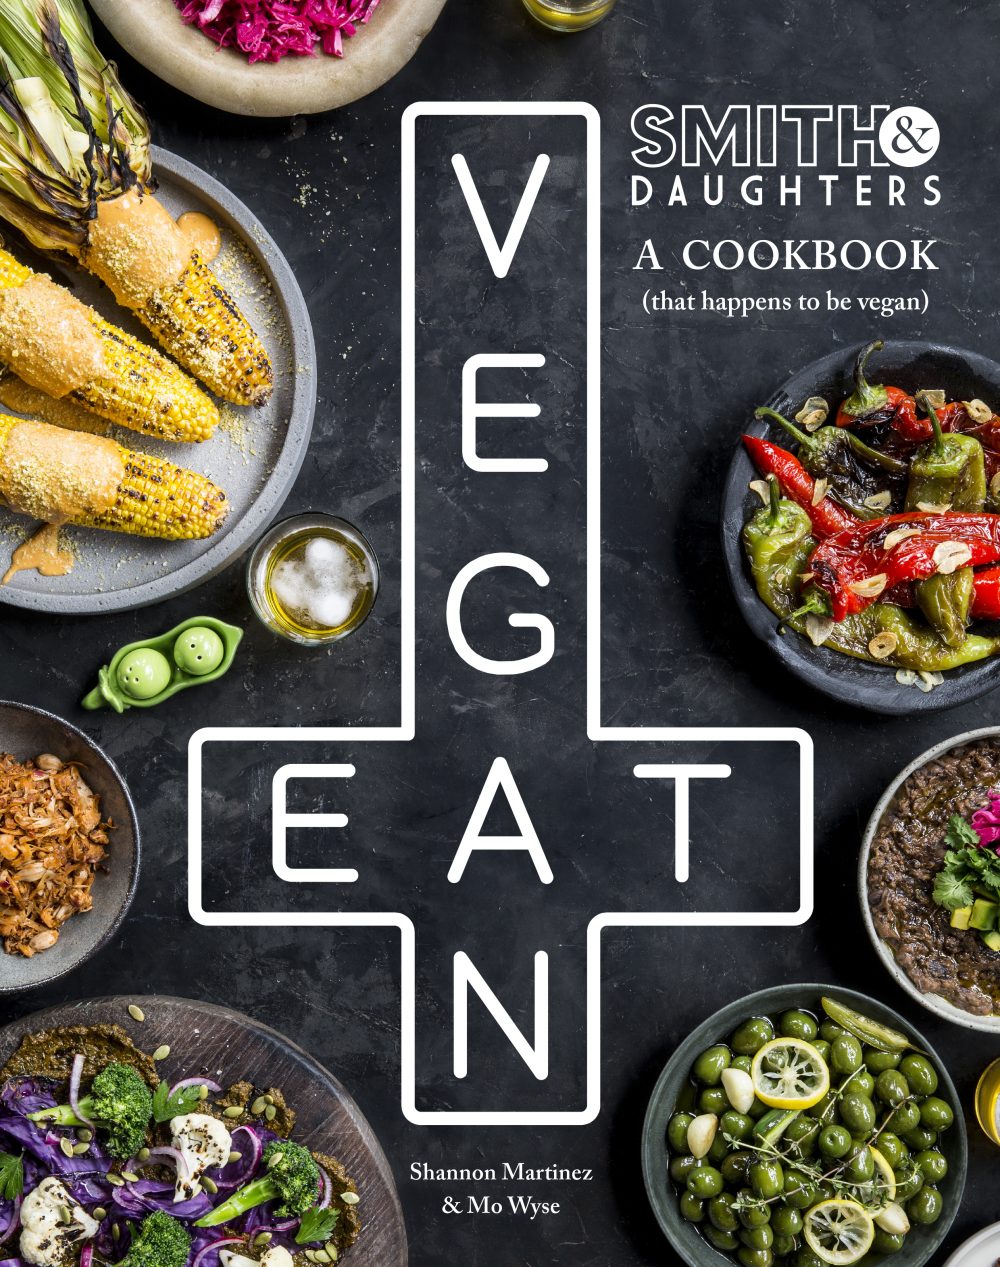 Smith & Daughters:  A Cookbook (That Happens To Be Vegan)